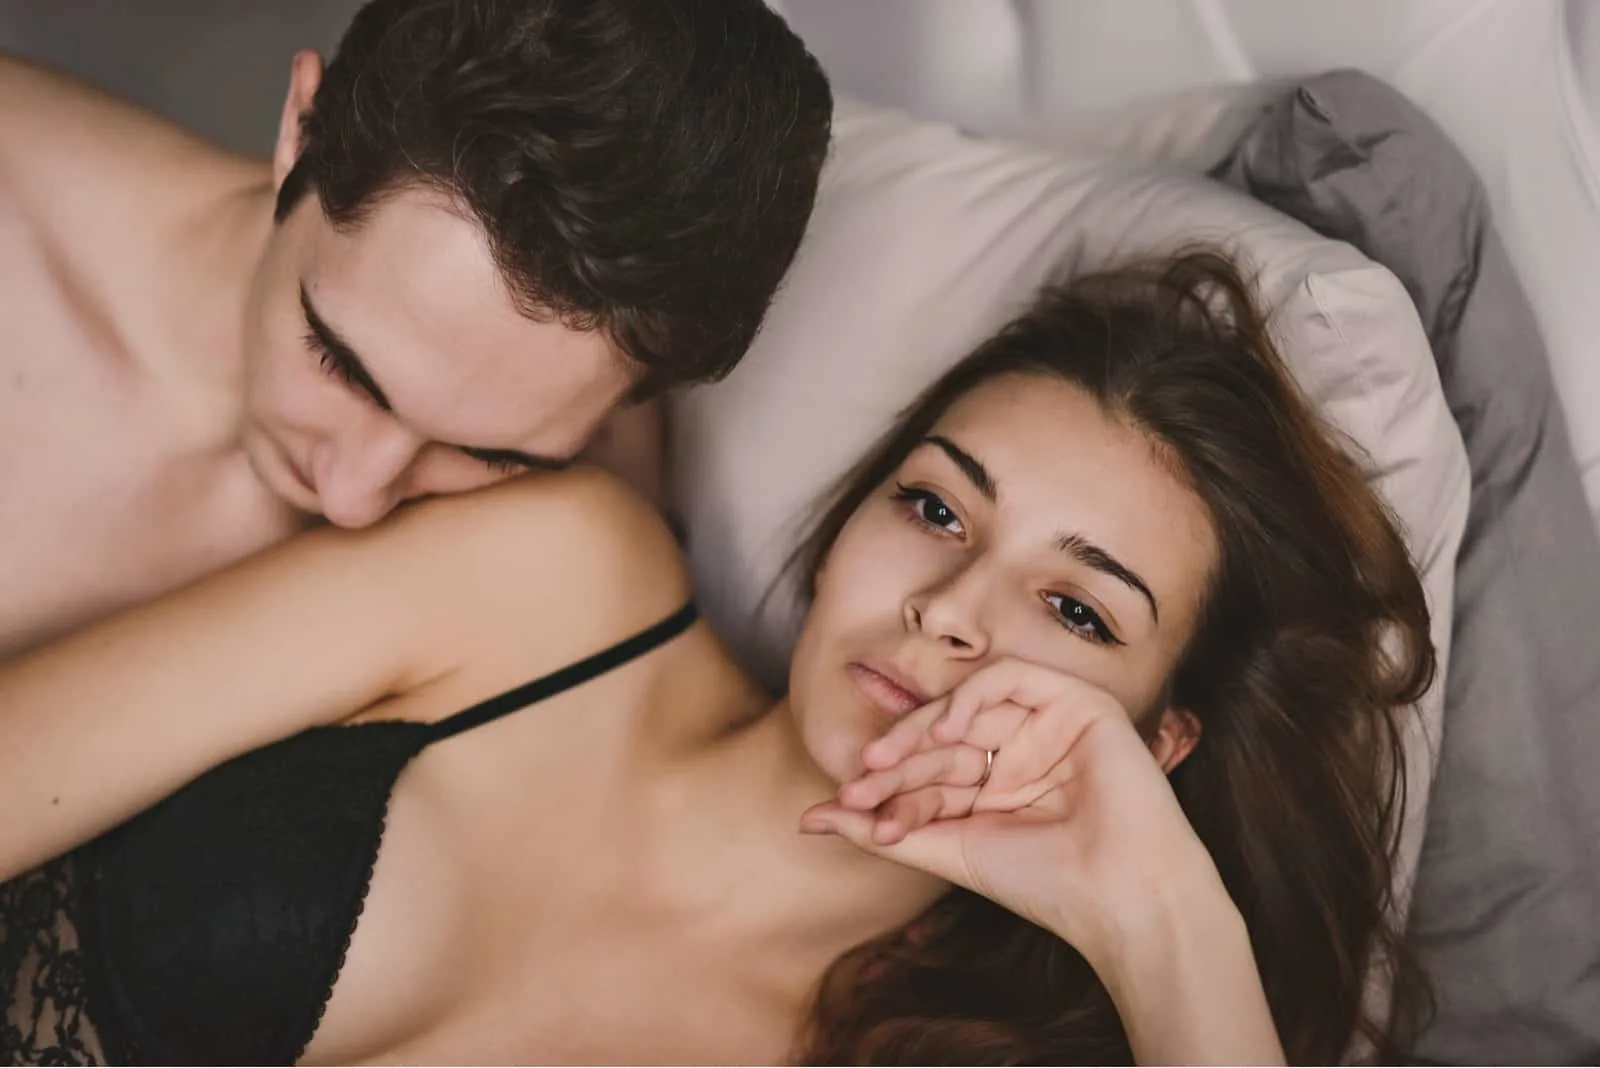 disinterested woman in bed with man